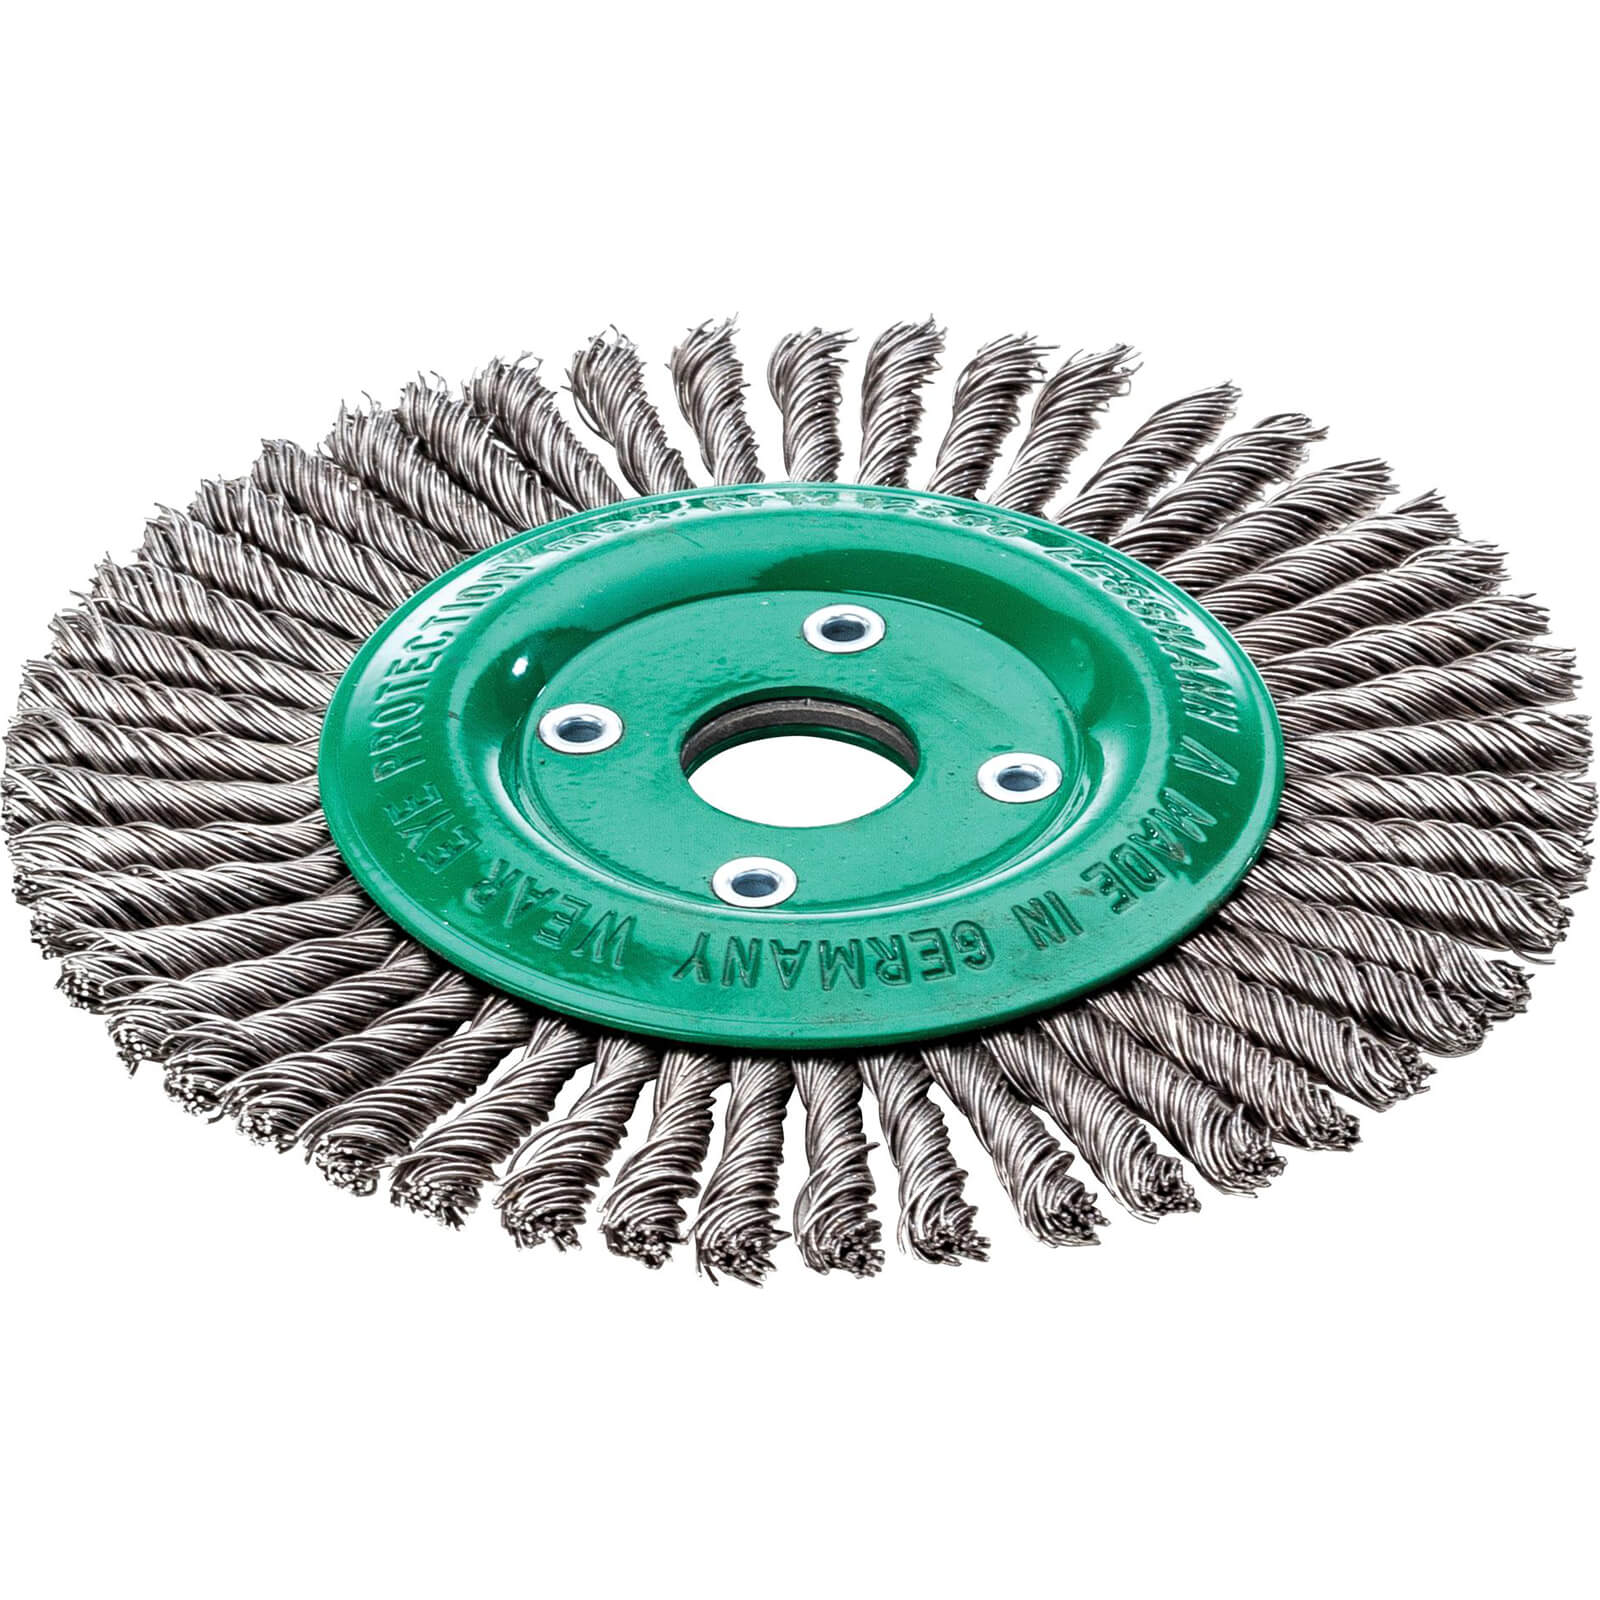 Photo of Lessmann Pipeline Stainless Steel Wire Wheel Brush 178mm 22.2mm Bore